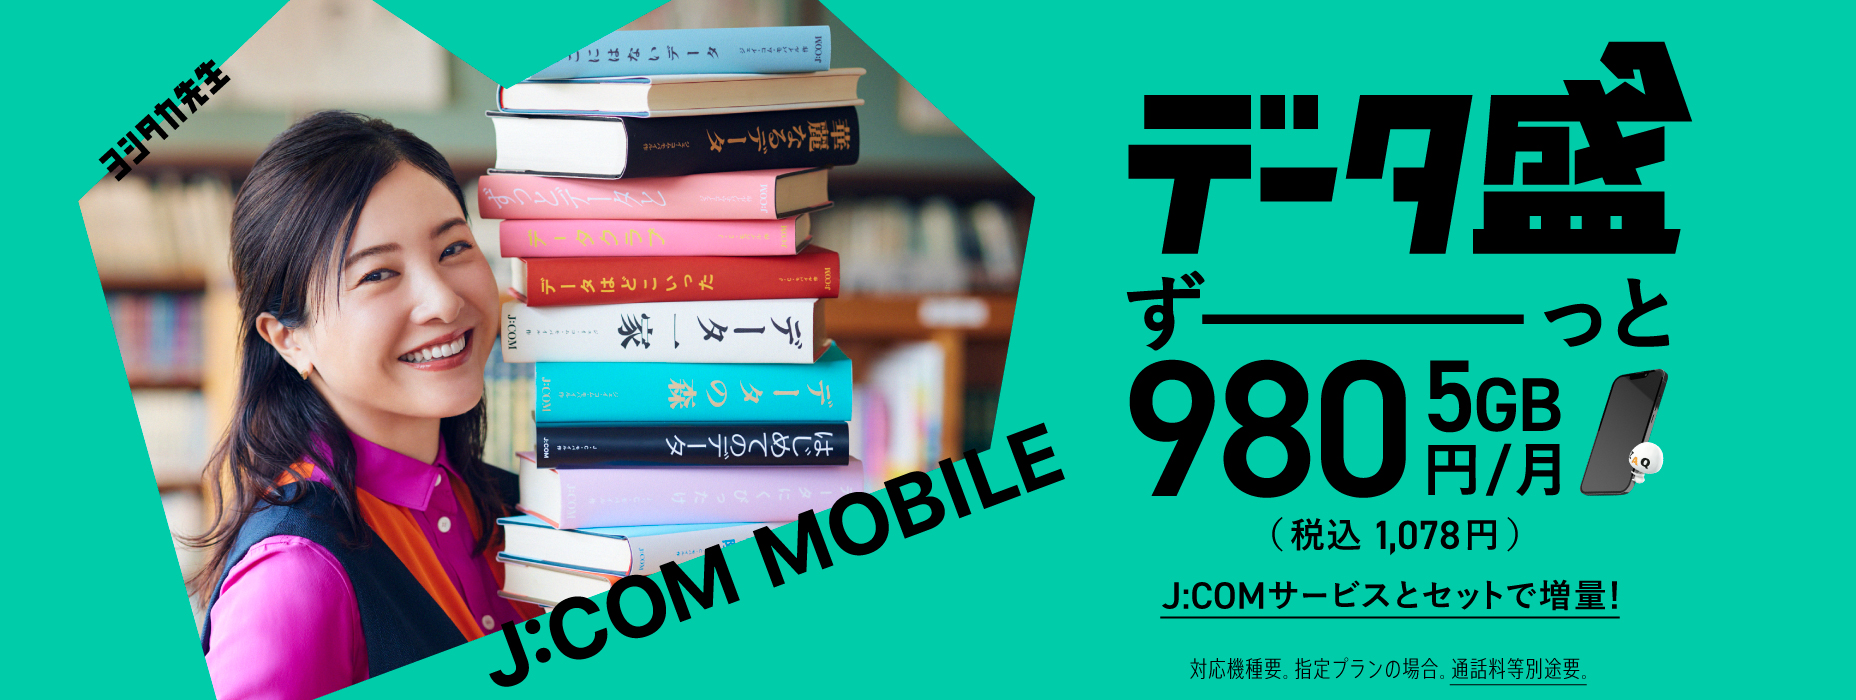 Date Mori J:COM MOBILE is 5GB 980 yen/month (1,078 yen including tax) Increase your data with J:COM service set! Compatible model required. For designated plans. Separate call charges are required.